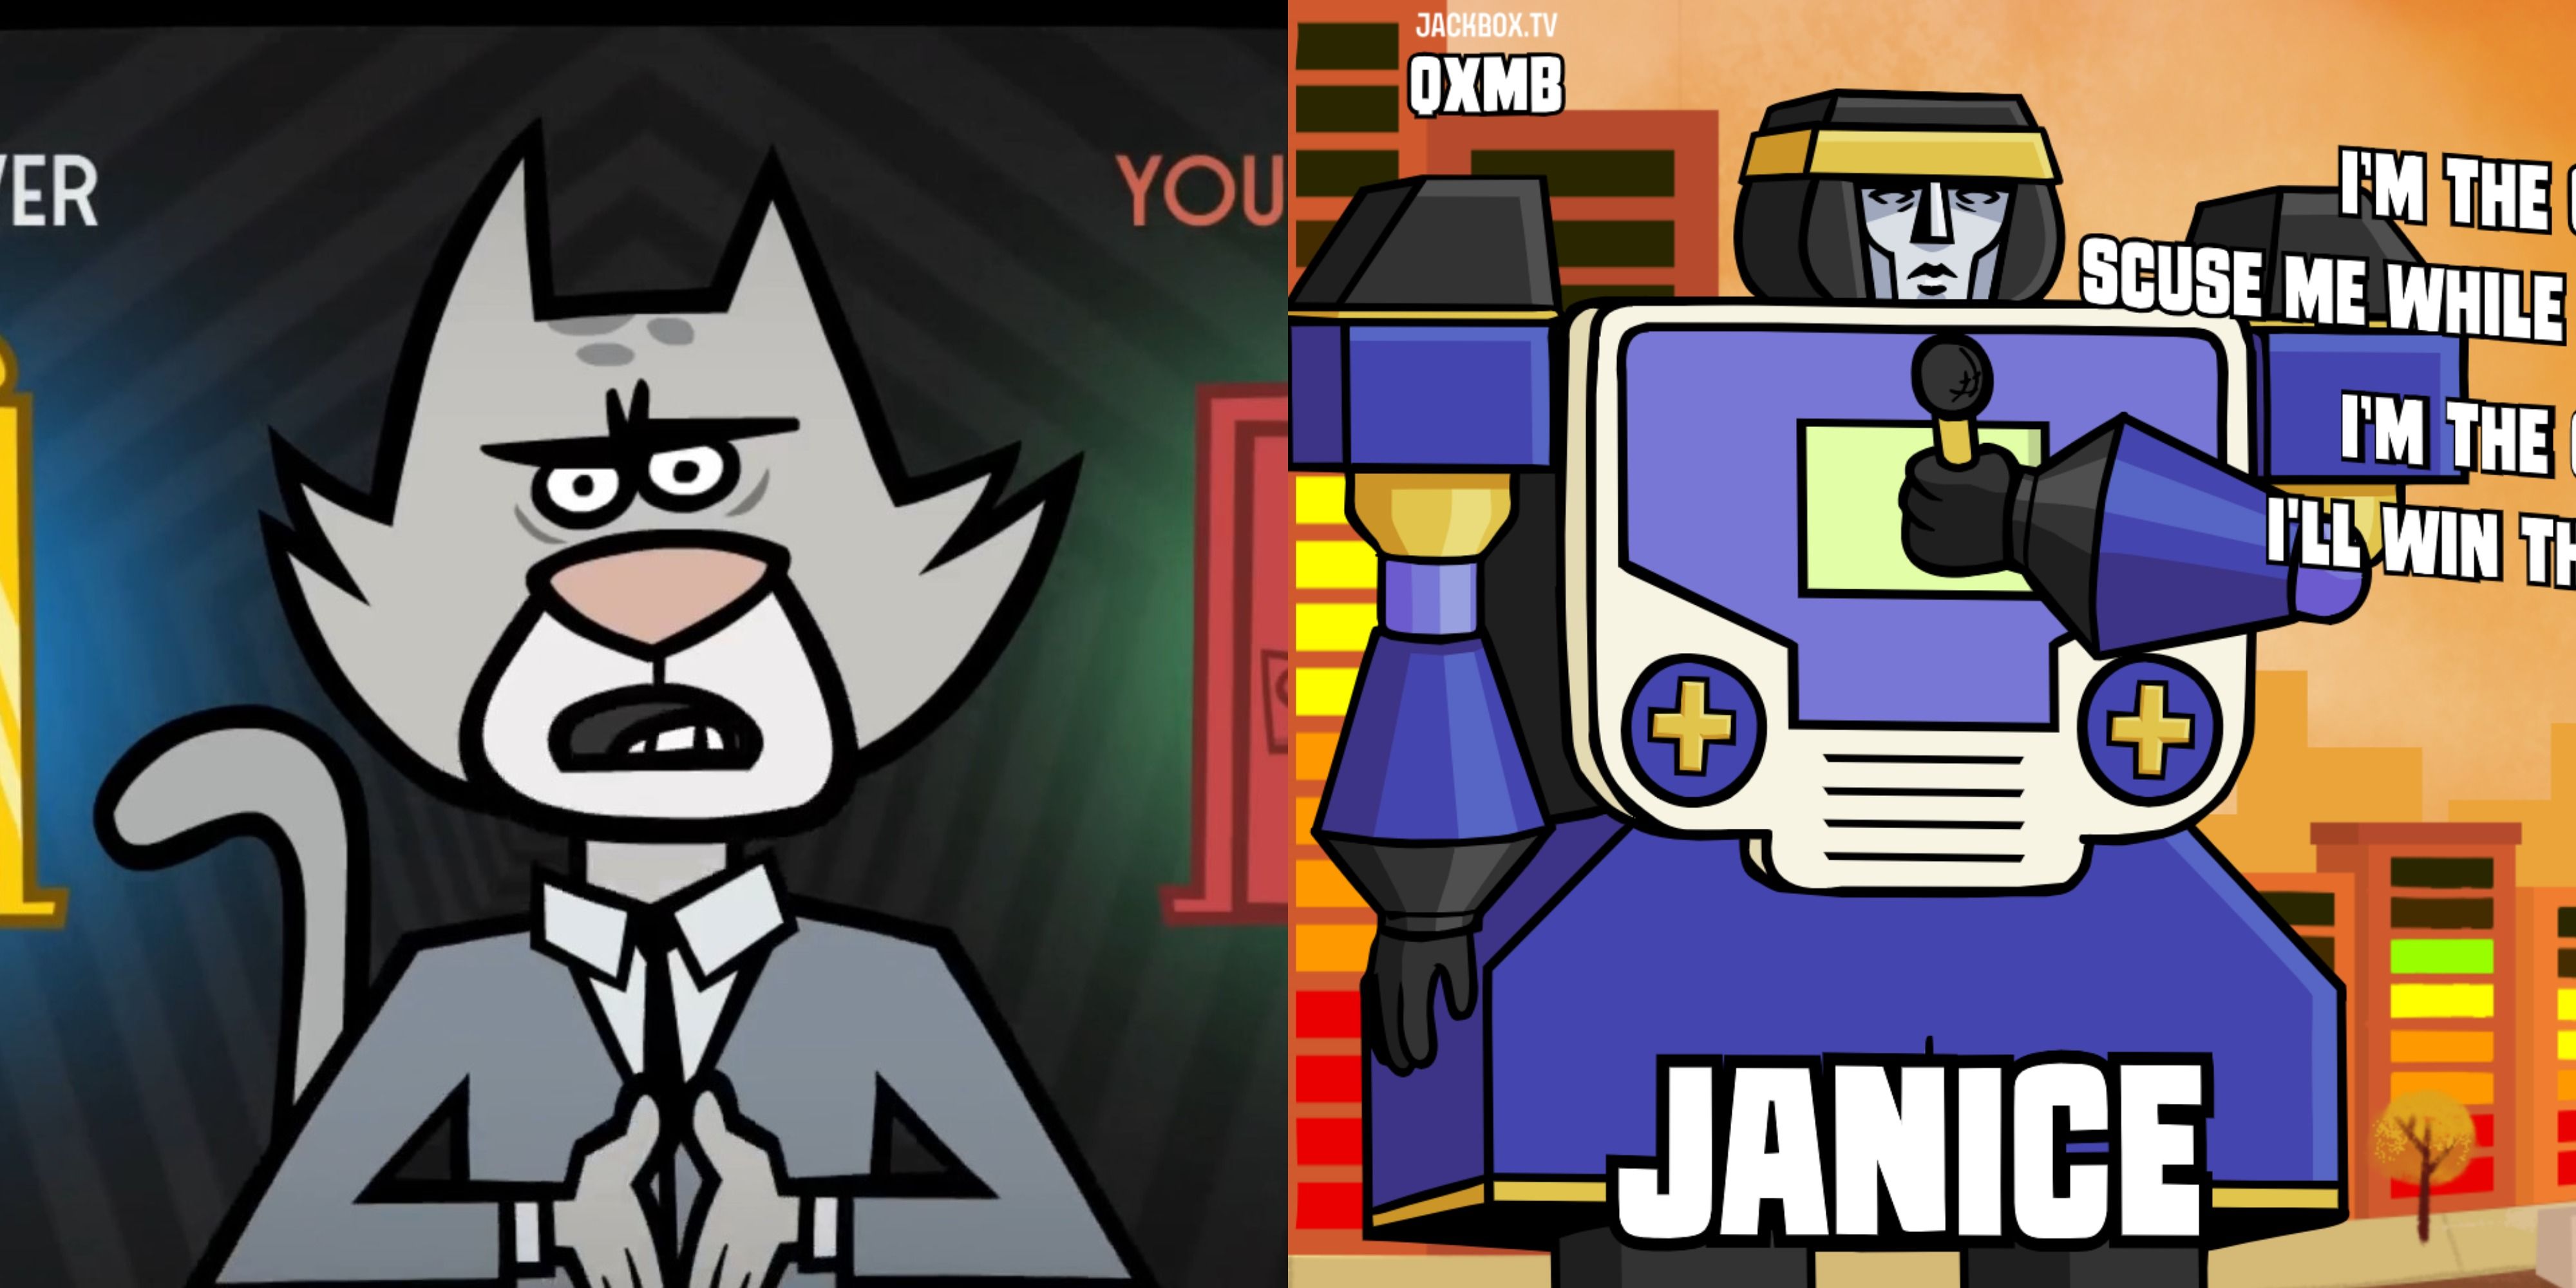 Featured image the cat presenter from Split The Room and a Mad Verse City Robot from Jackbox Party Pack